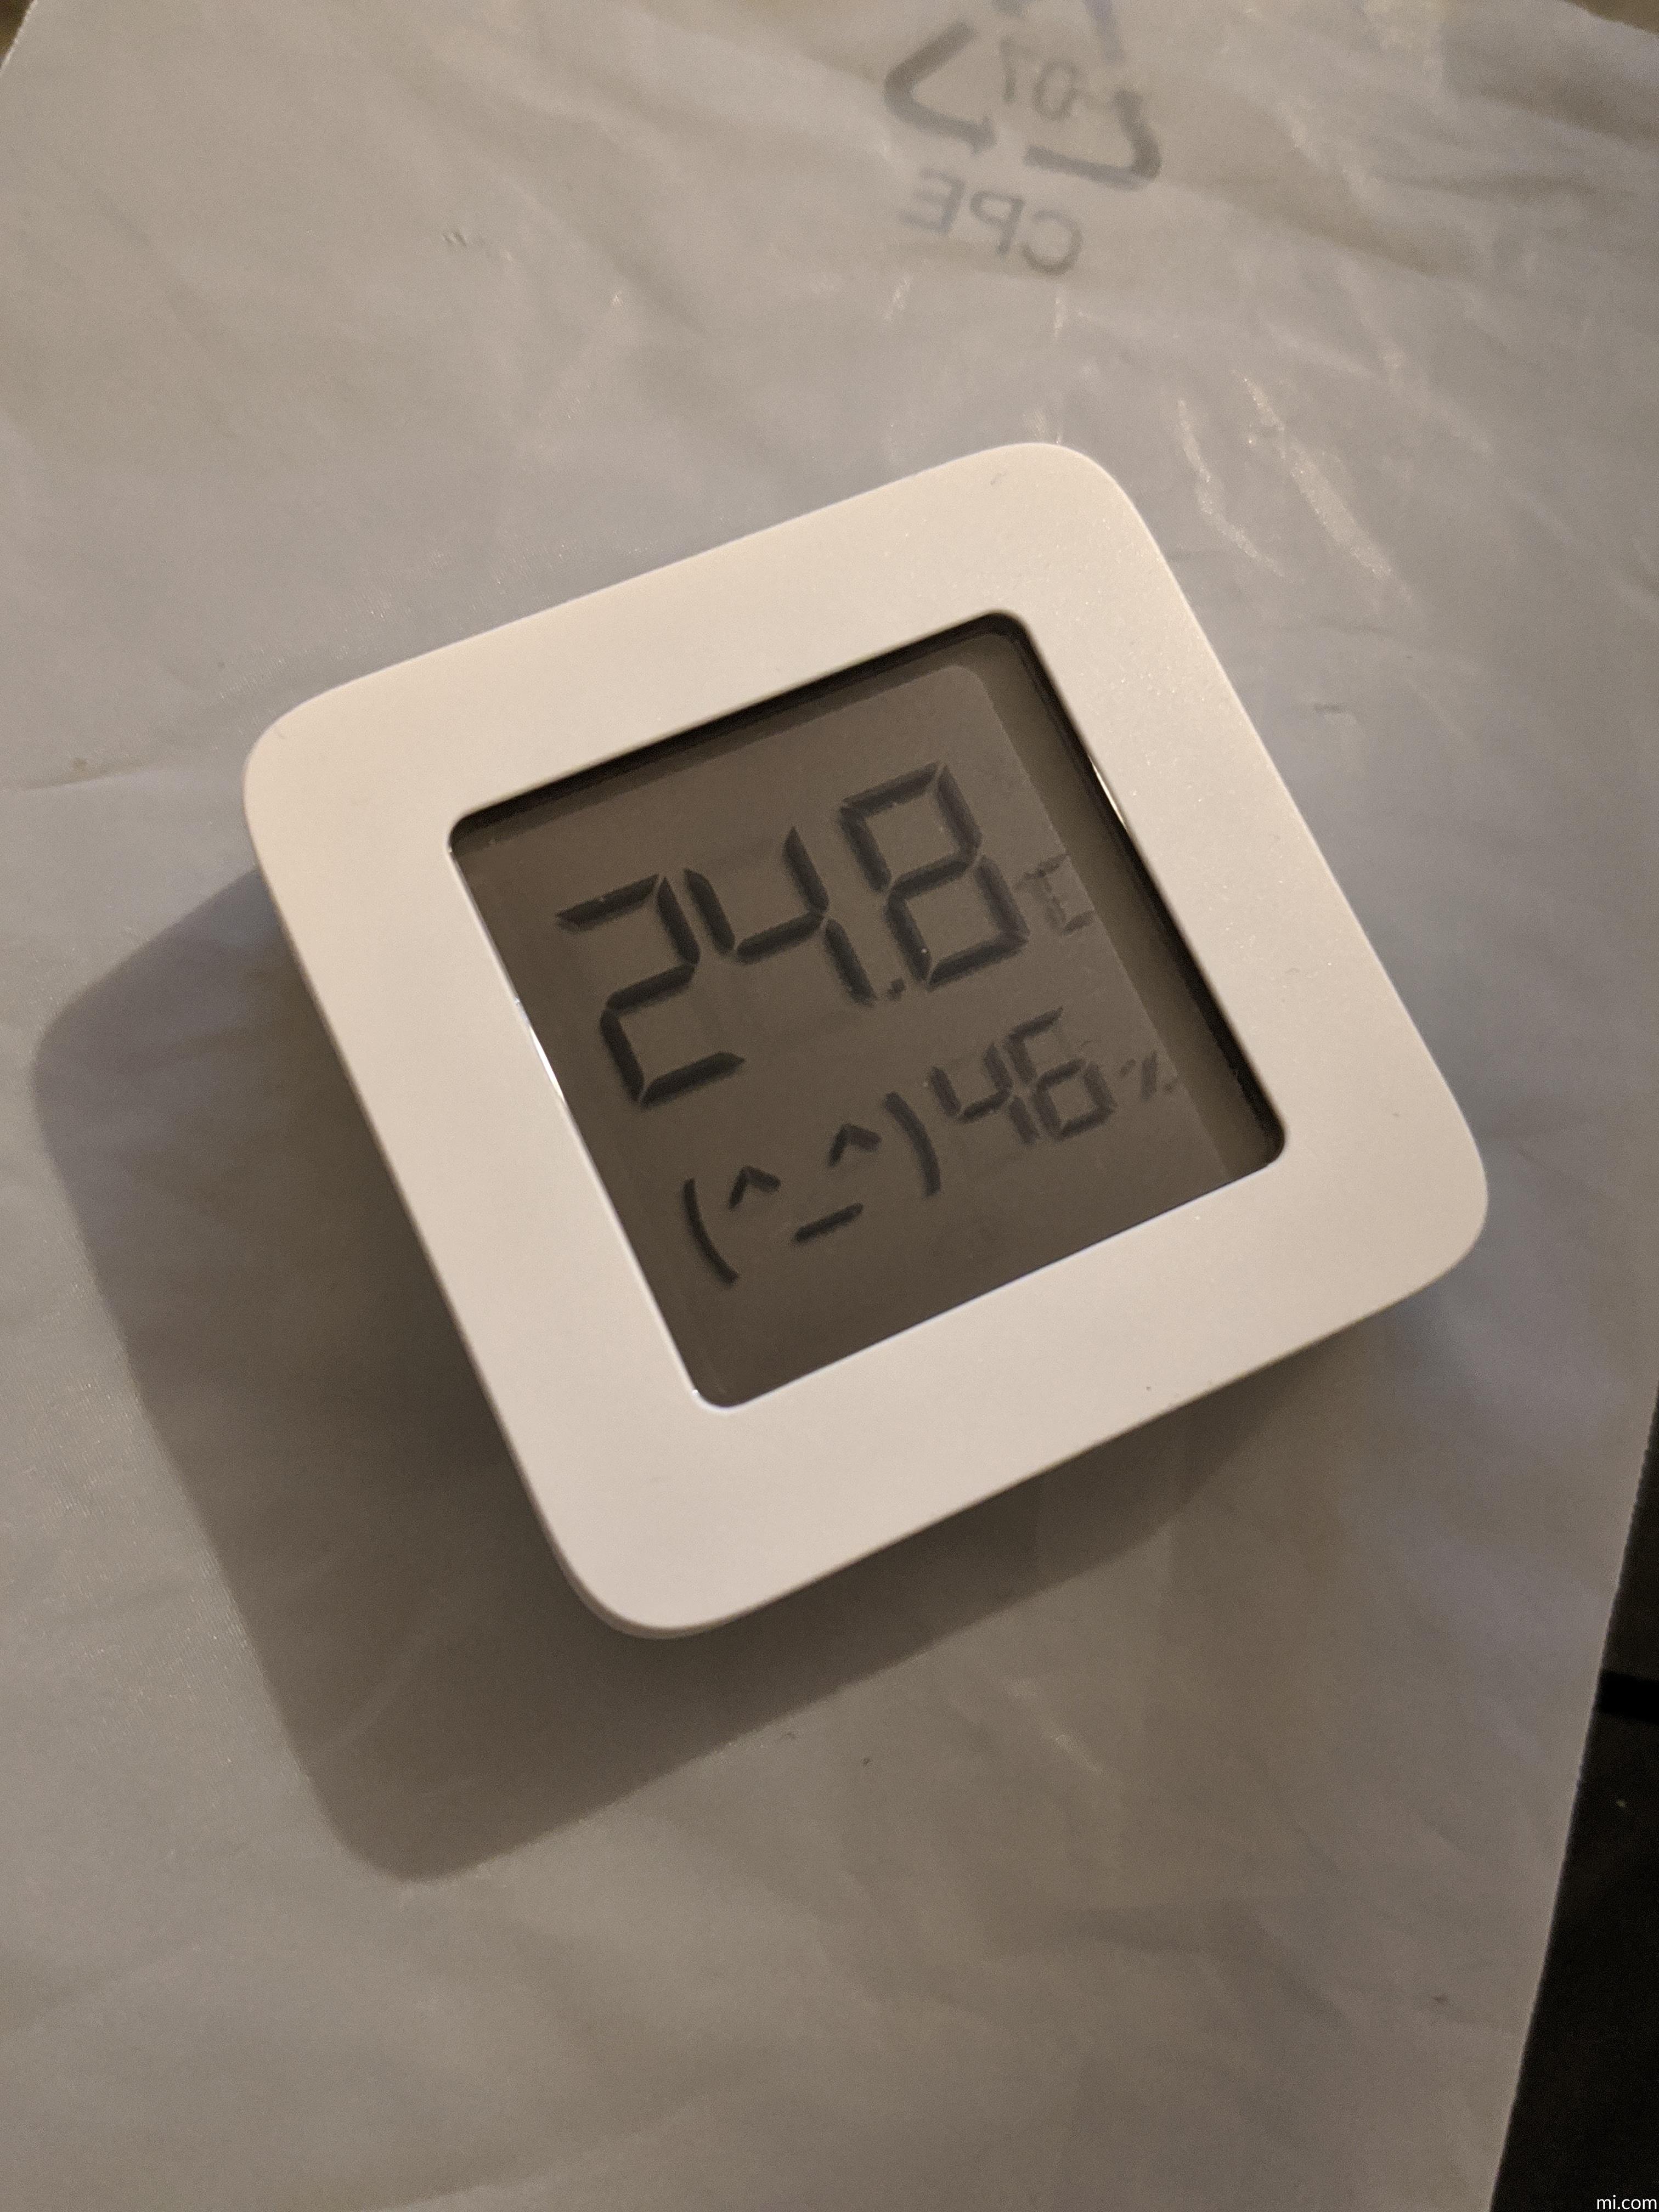 Mi Temperature and Humidity Monitor 2]Informations sur le produit - France